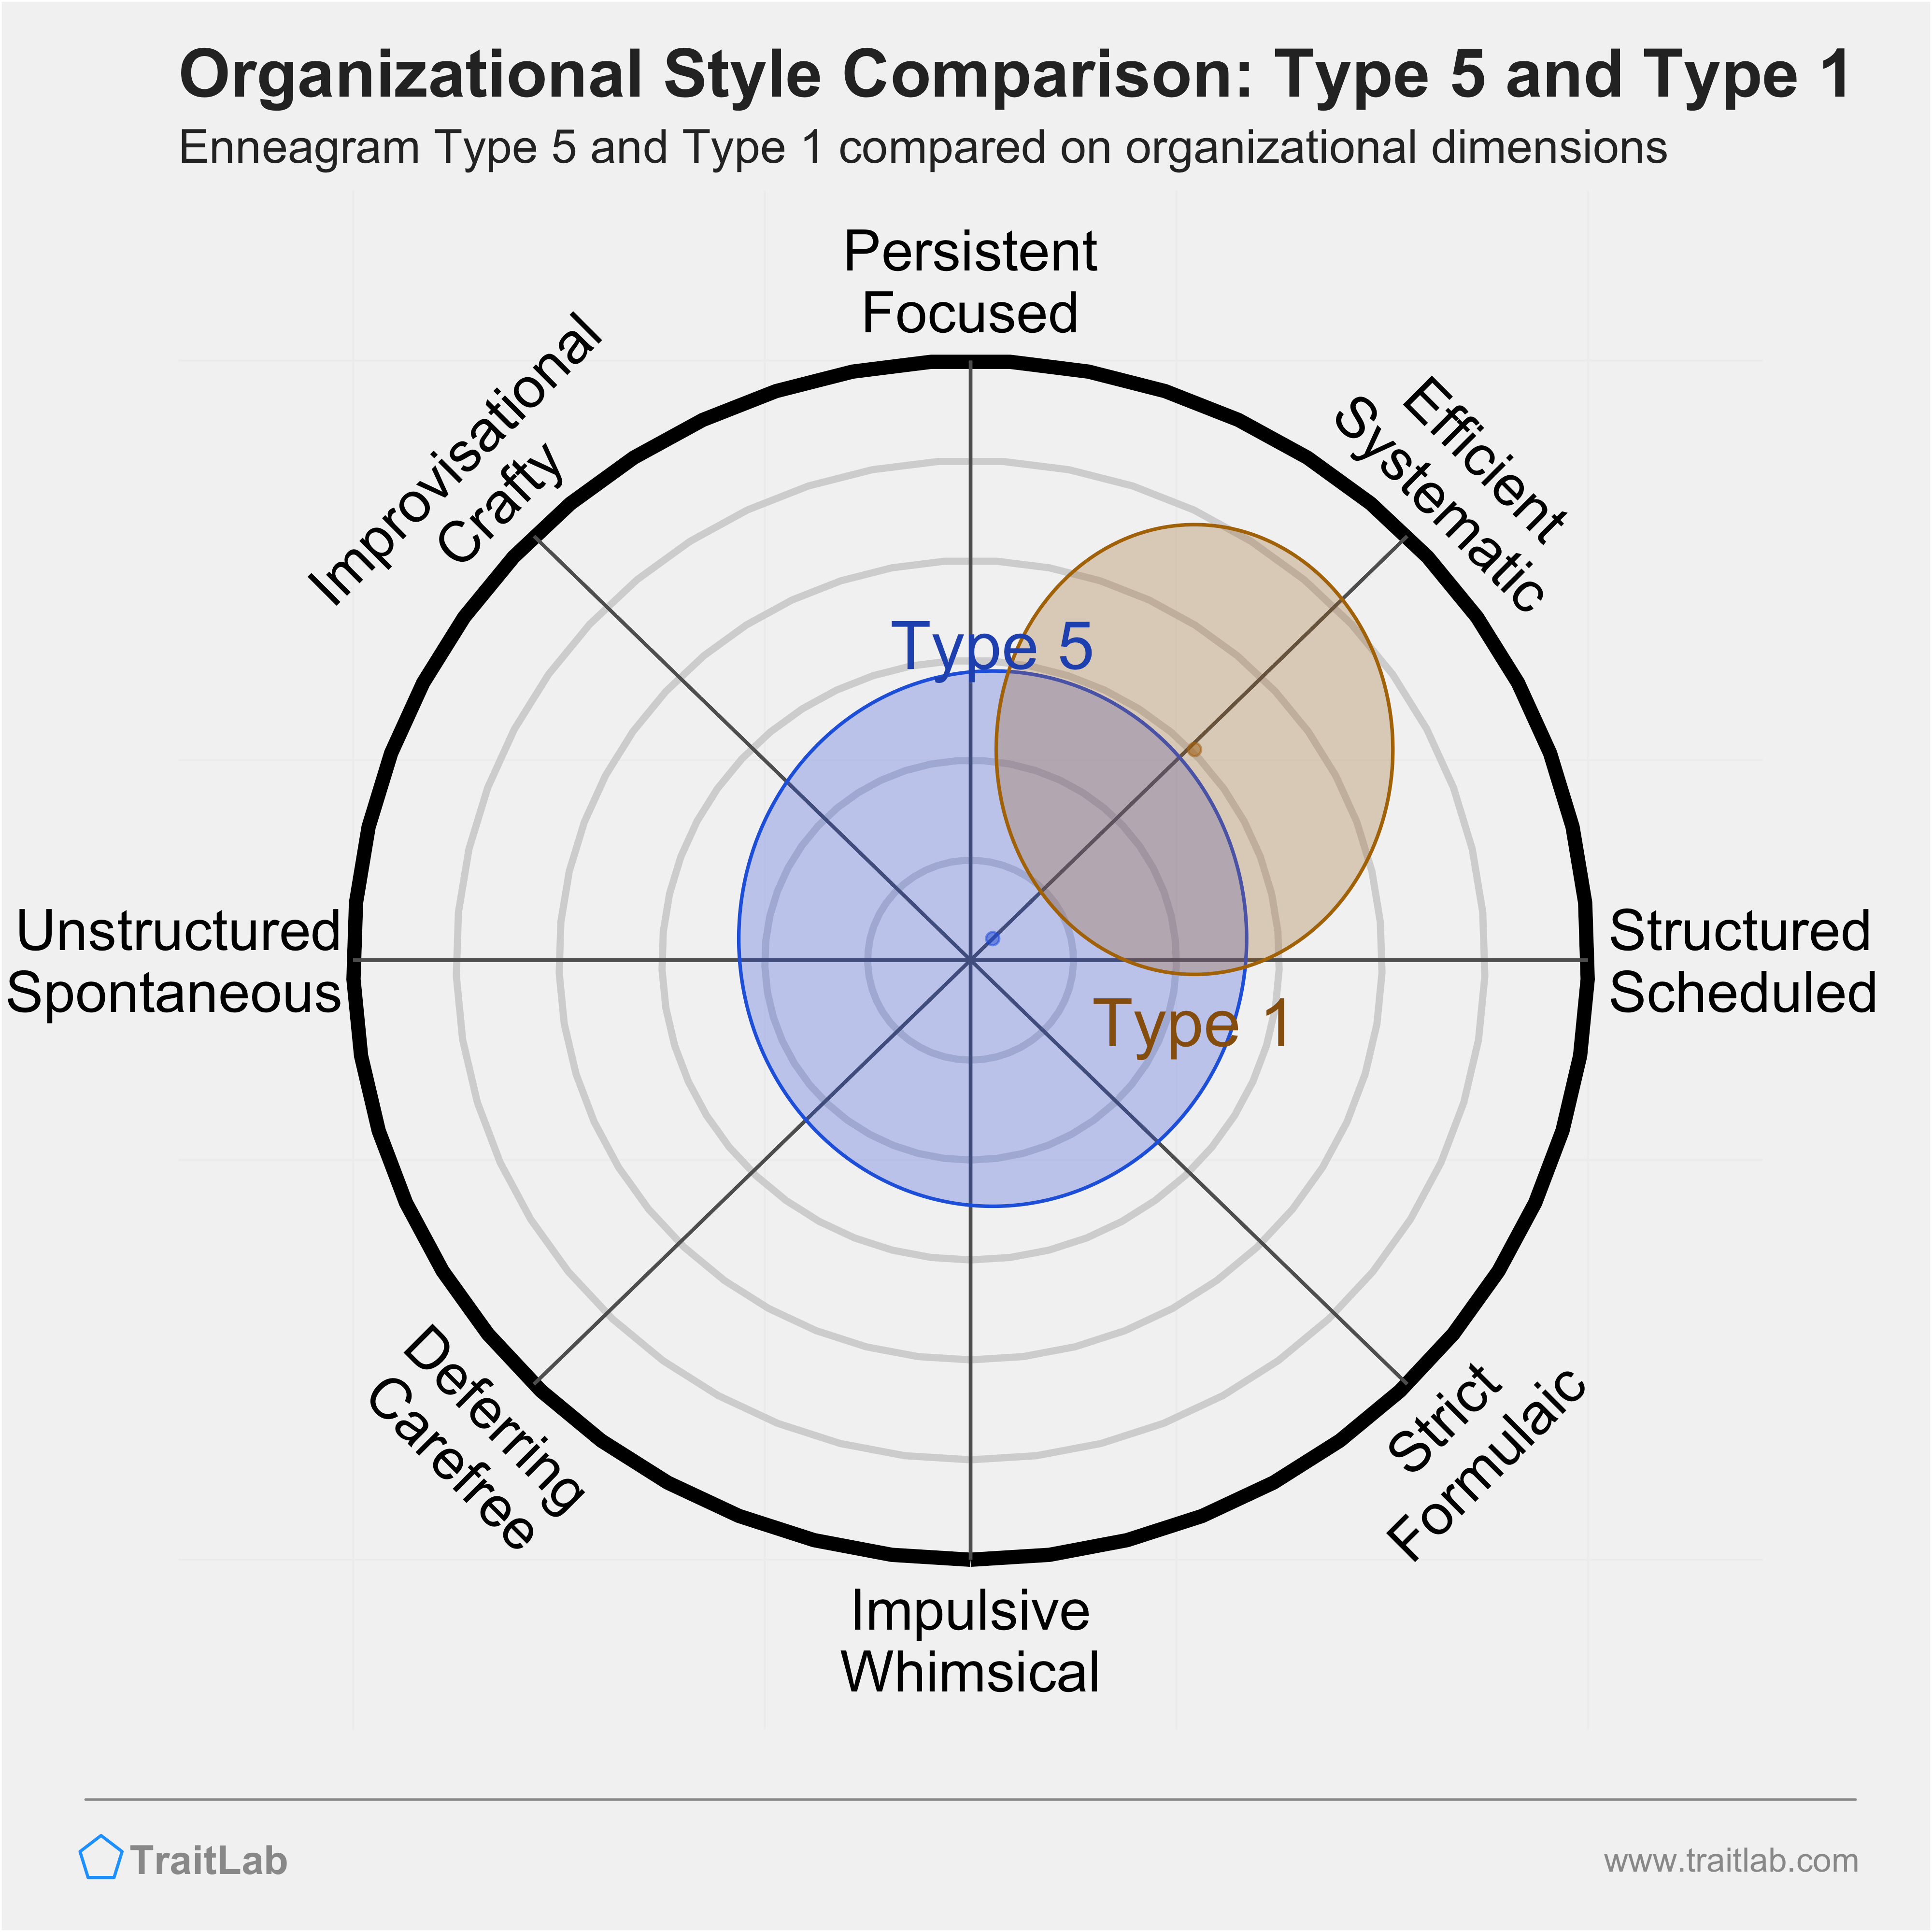 Type 5 and Type 1 comparison across organizational dimensions